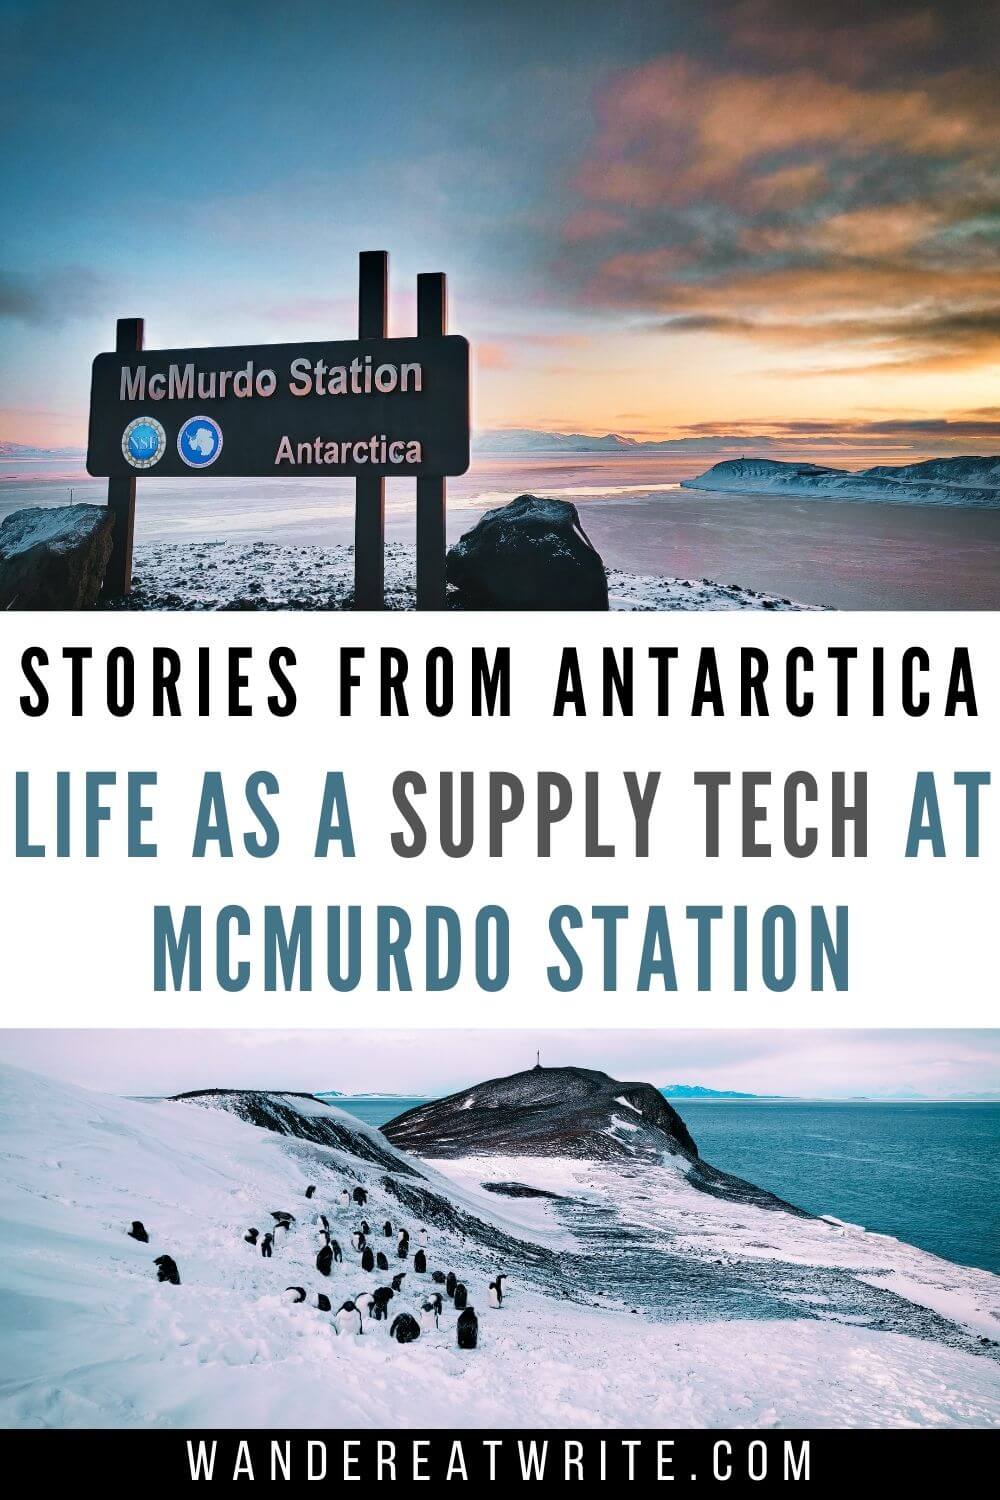 Working in Antarctica and stories from the ice: life as a supply tech at McMurdo Station